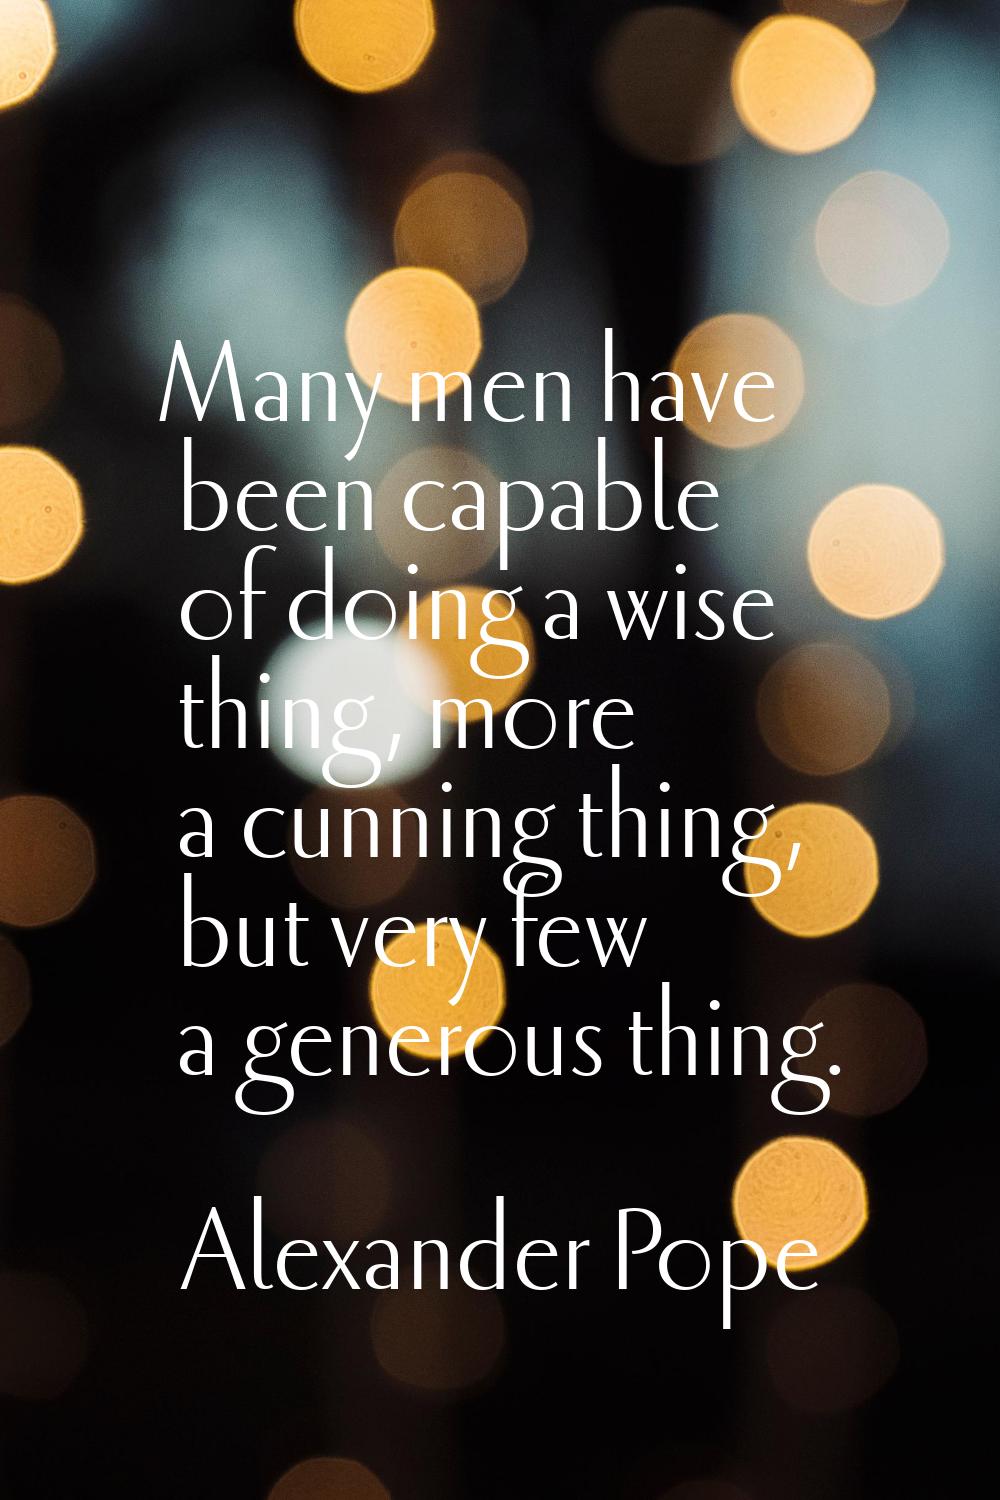 Many men have been capable of doing a wise thing, more a cunning thing, but very few a generous thi